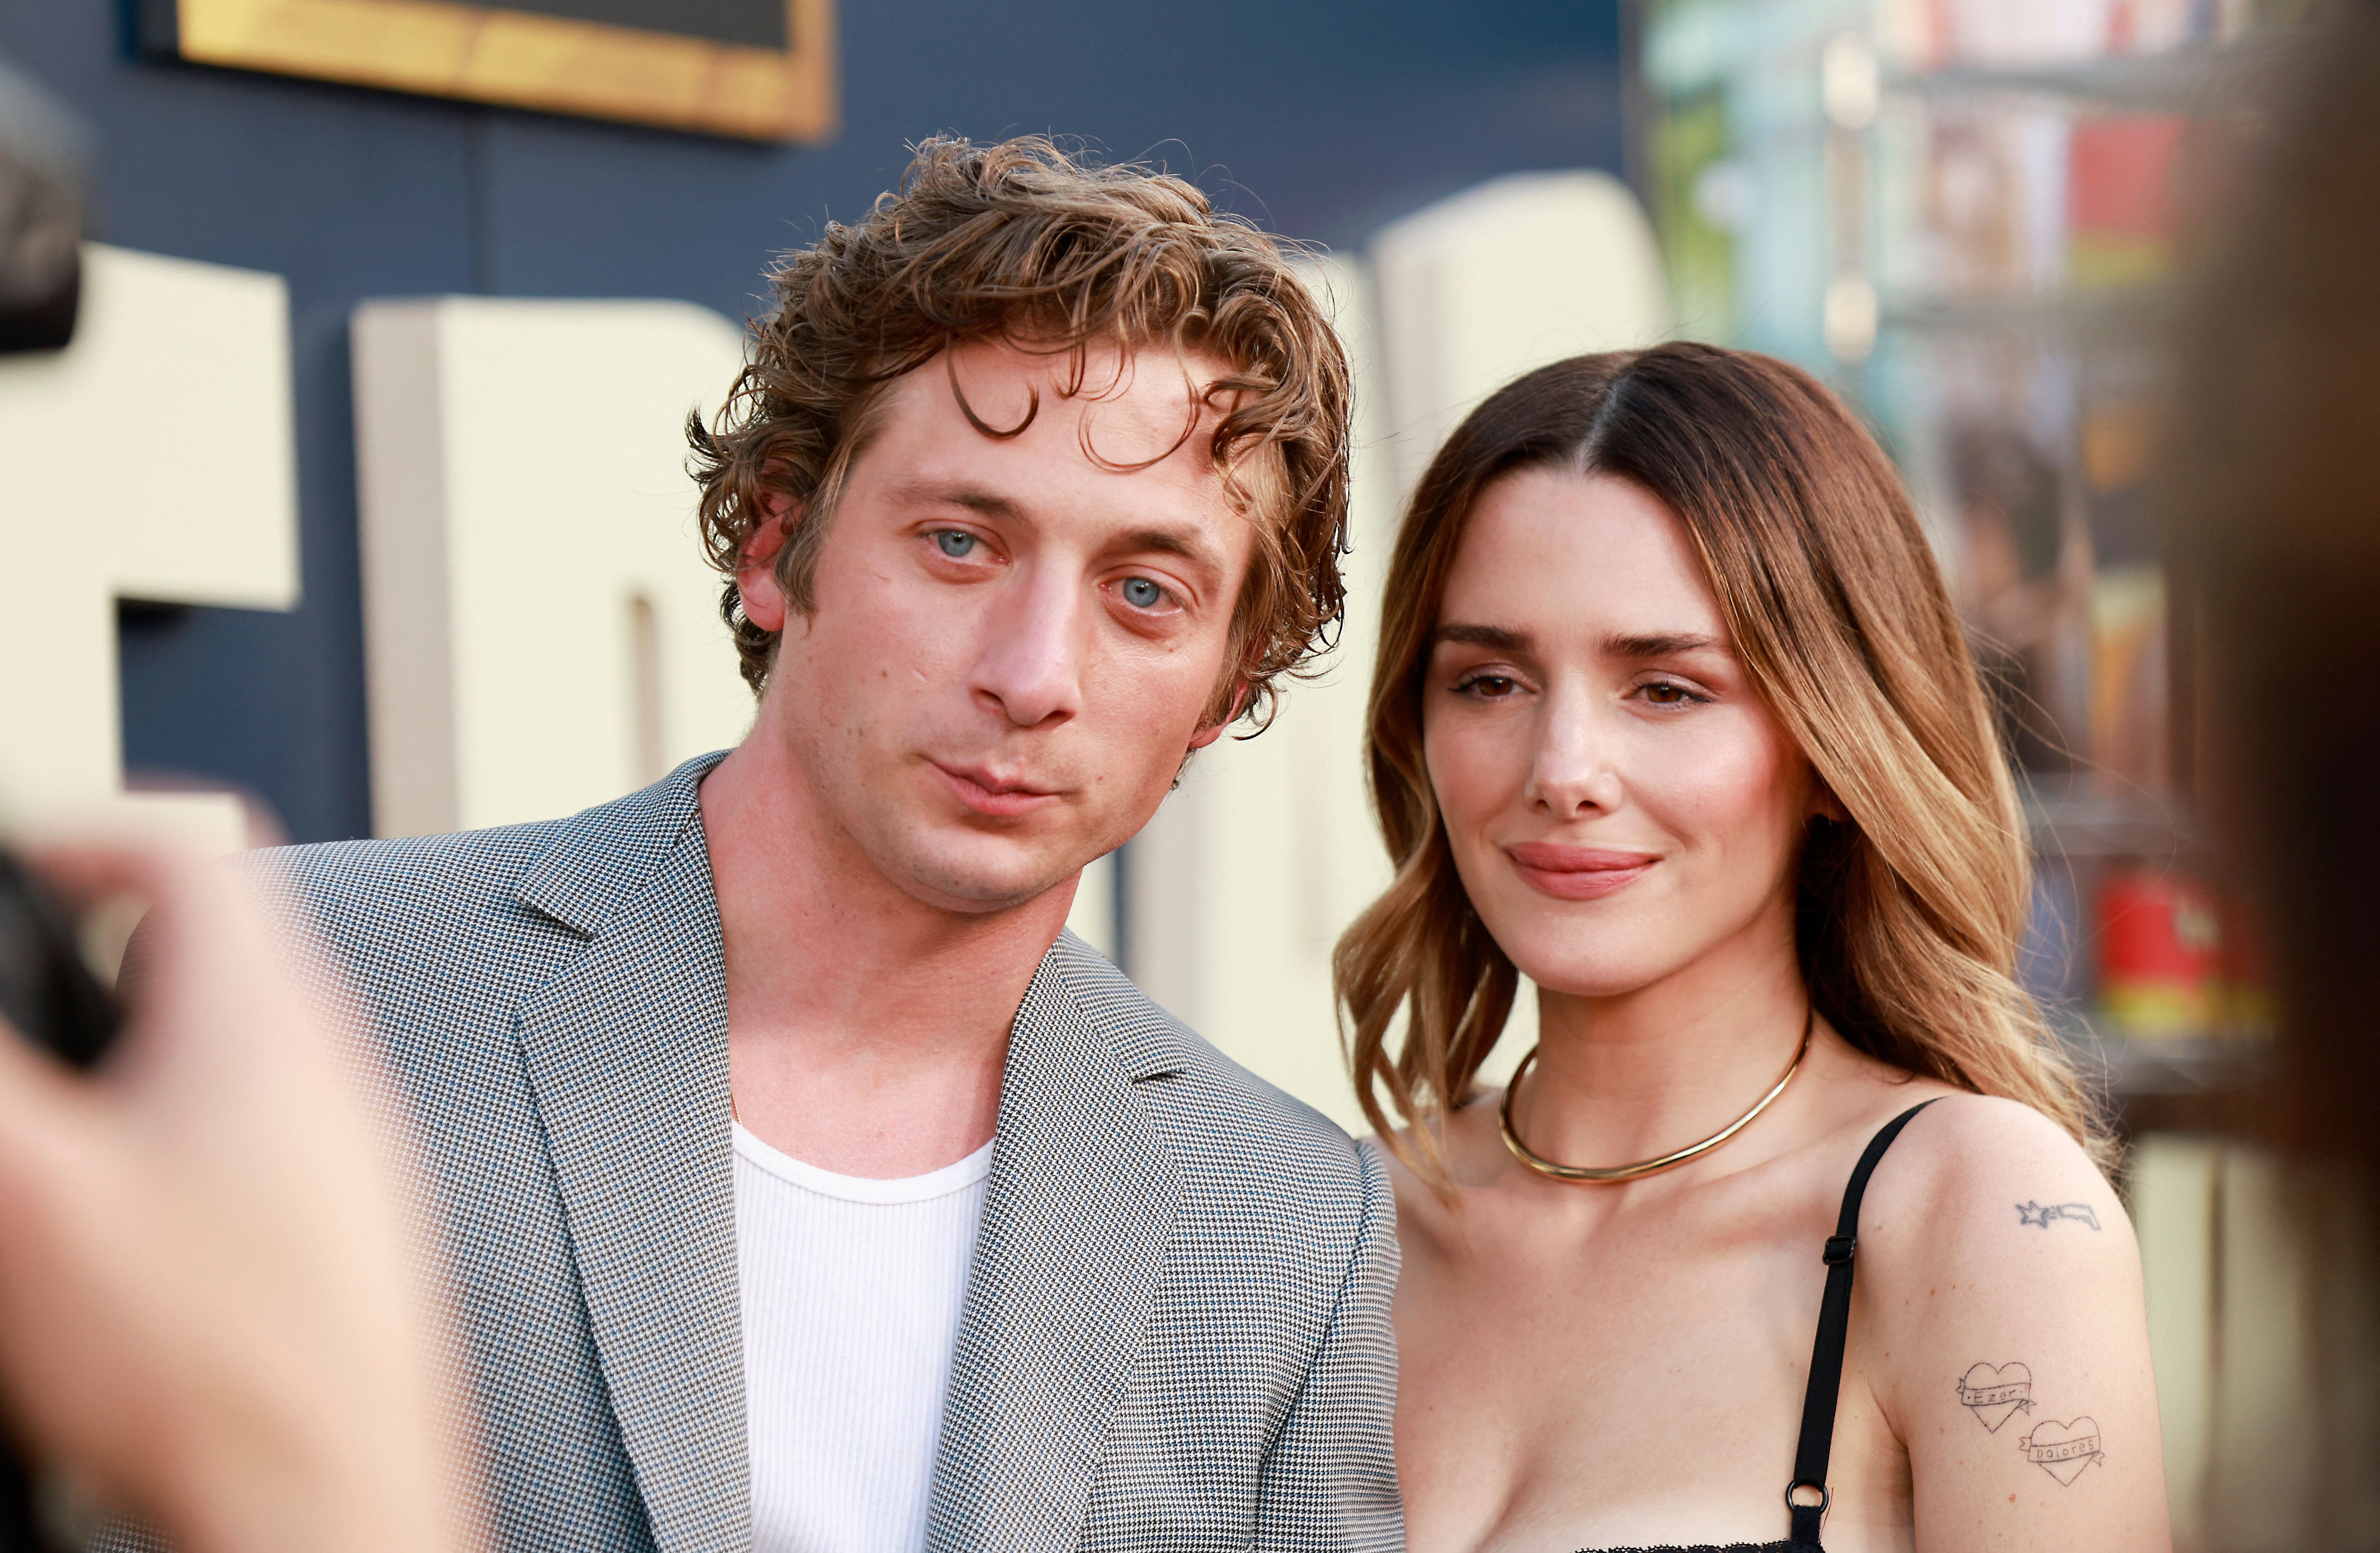 US actor Jeremy Allen White (L) and his wife actress Addison Timlin arrive to the Los Angeles premiere of FX's "The Bear" held at Goya Studios on June 20, 2022 in Los Angeles, California | Source: Getty Images